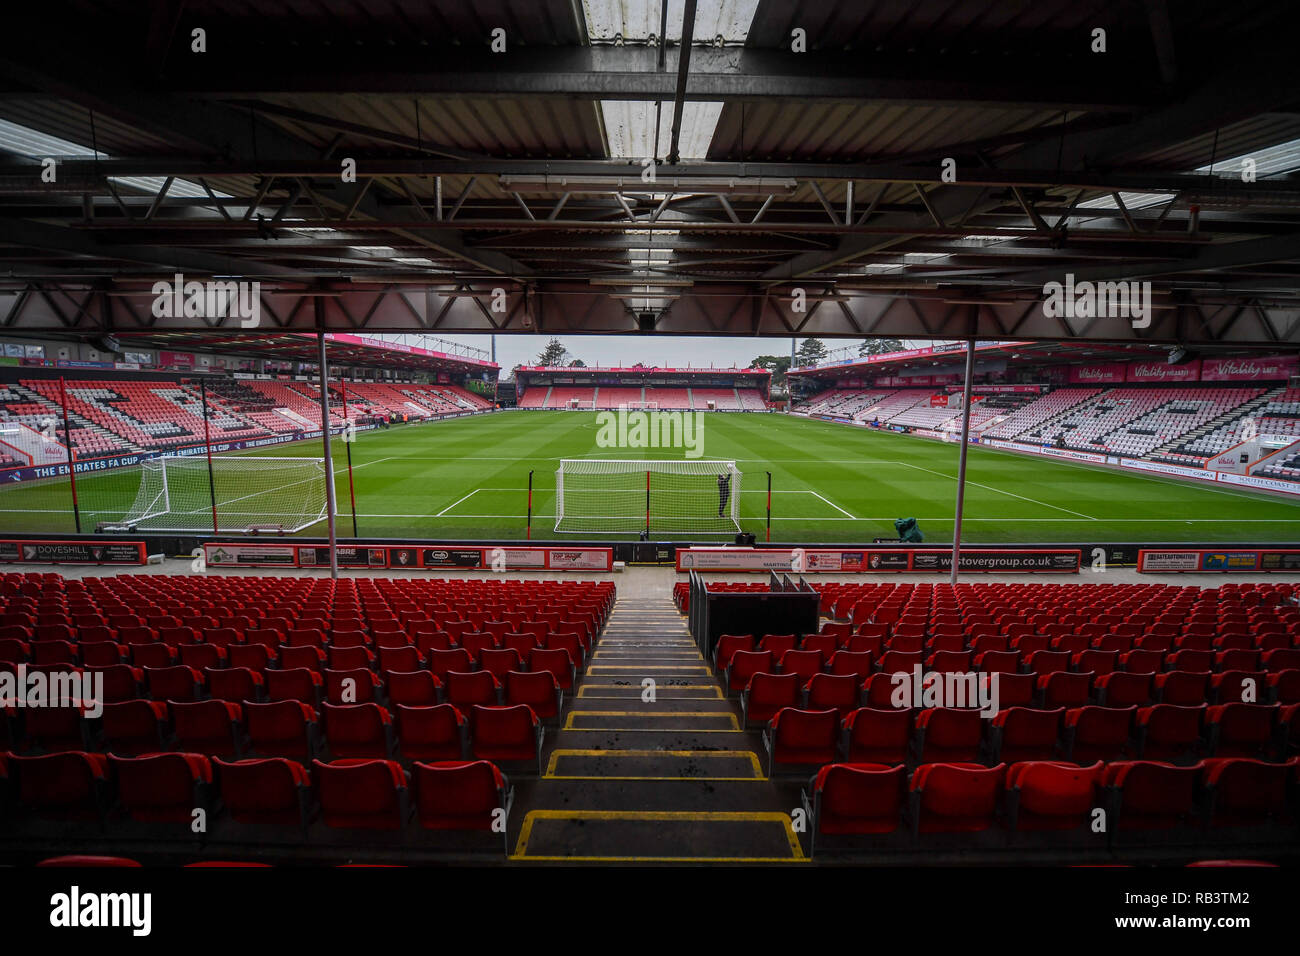 5th January 2019, Dean Court, Bournemouth, England; The Emirates FA Cup, 3rd Round, Bournemouth vs Brighton ;  Vitality Stadium before KO  Credit: Phil Westlake/News Images   English Football League images are subject to DataCo Licence Stock Photo